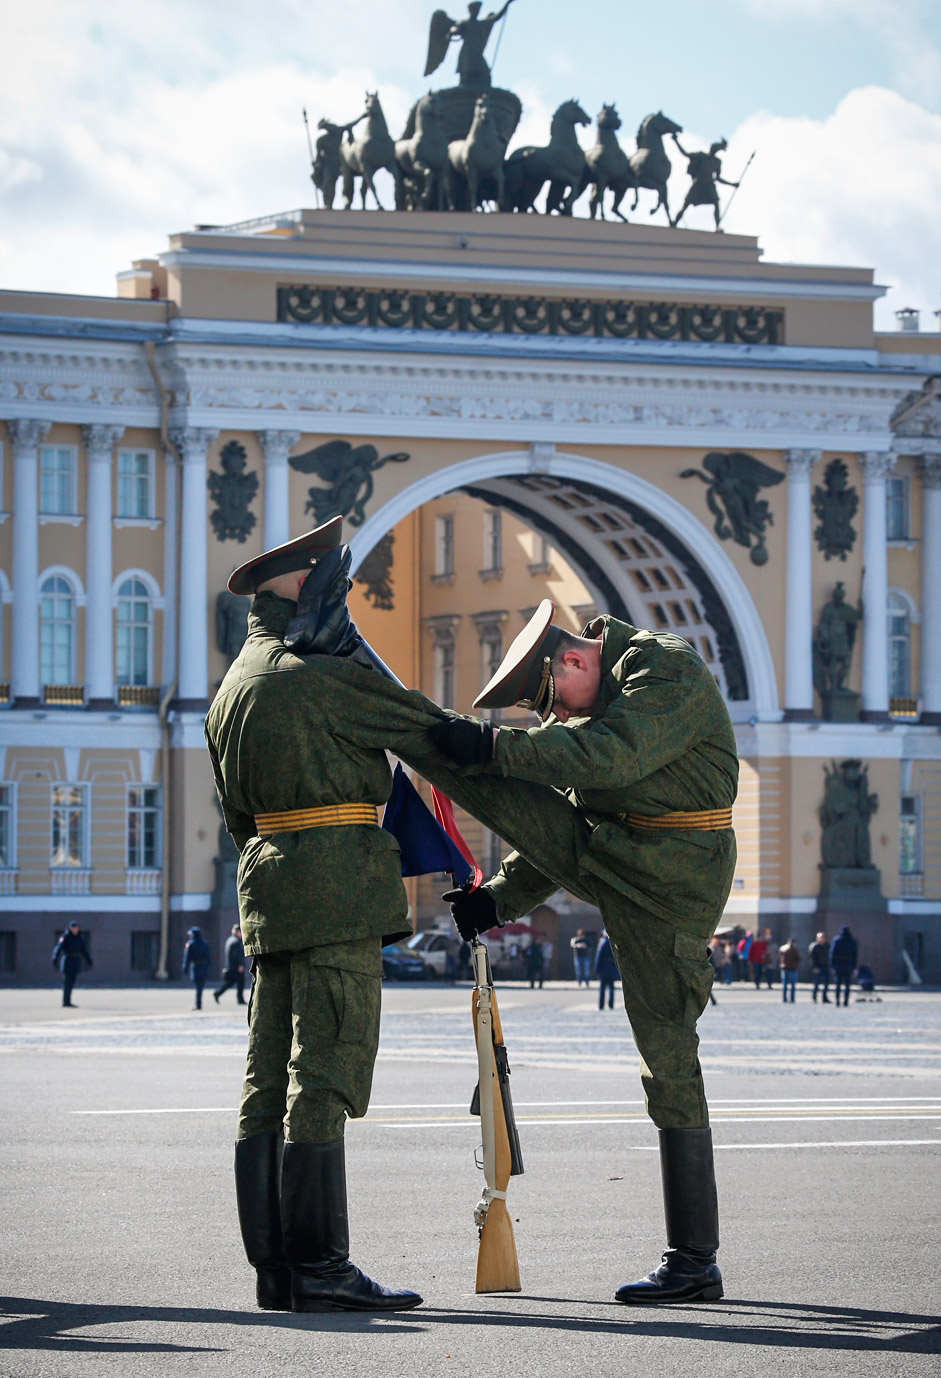 Soldiers warm up prior to a rehearsal for the Victory Day military parade